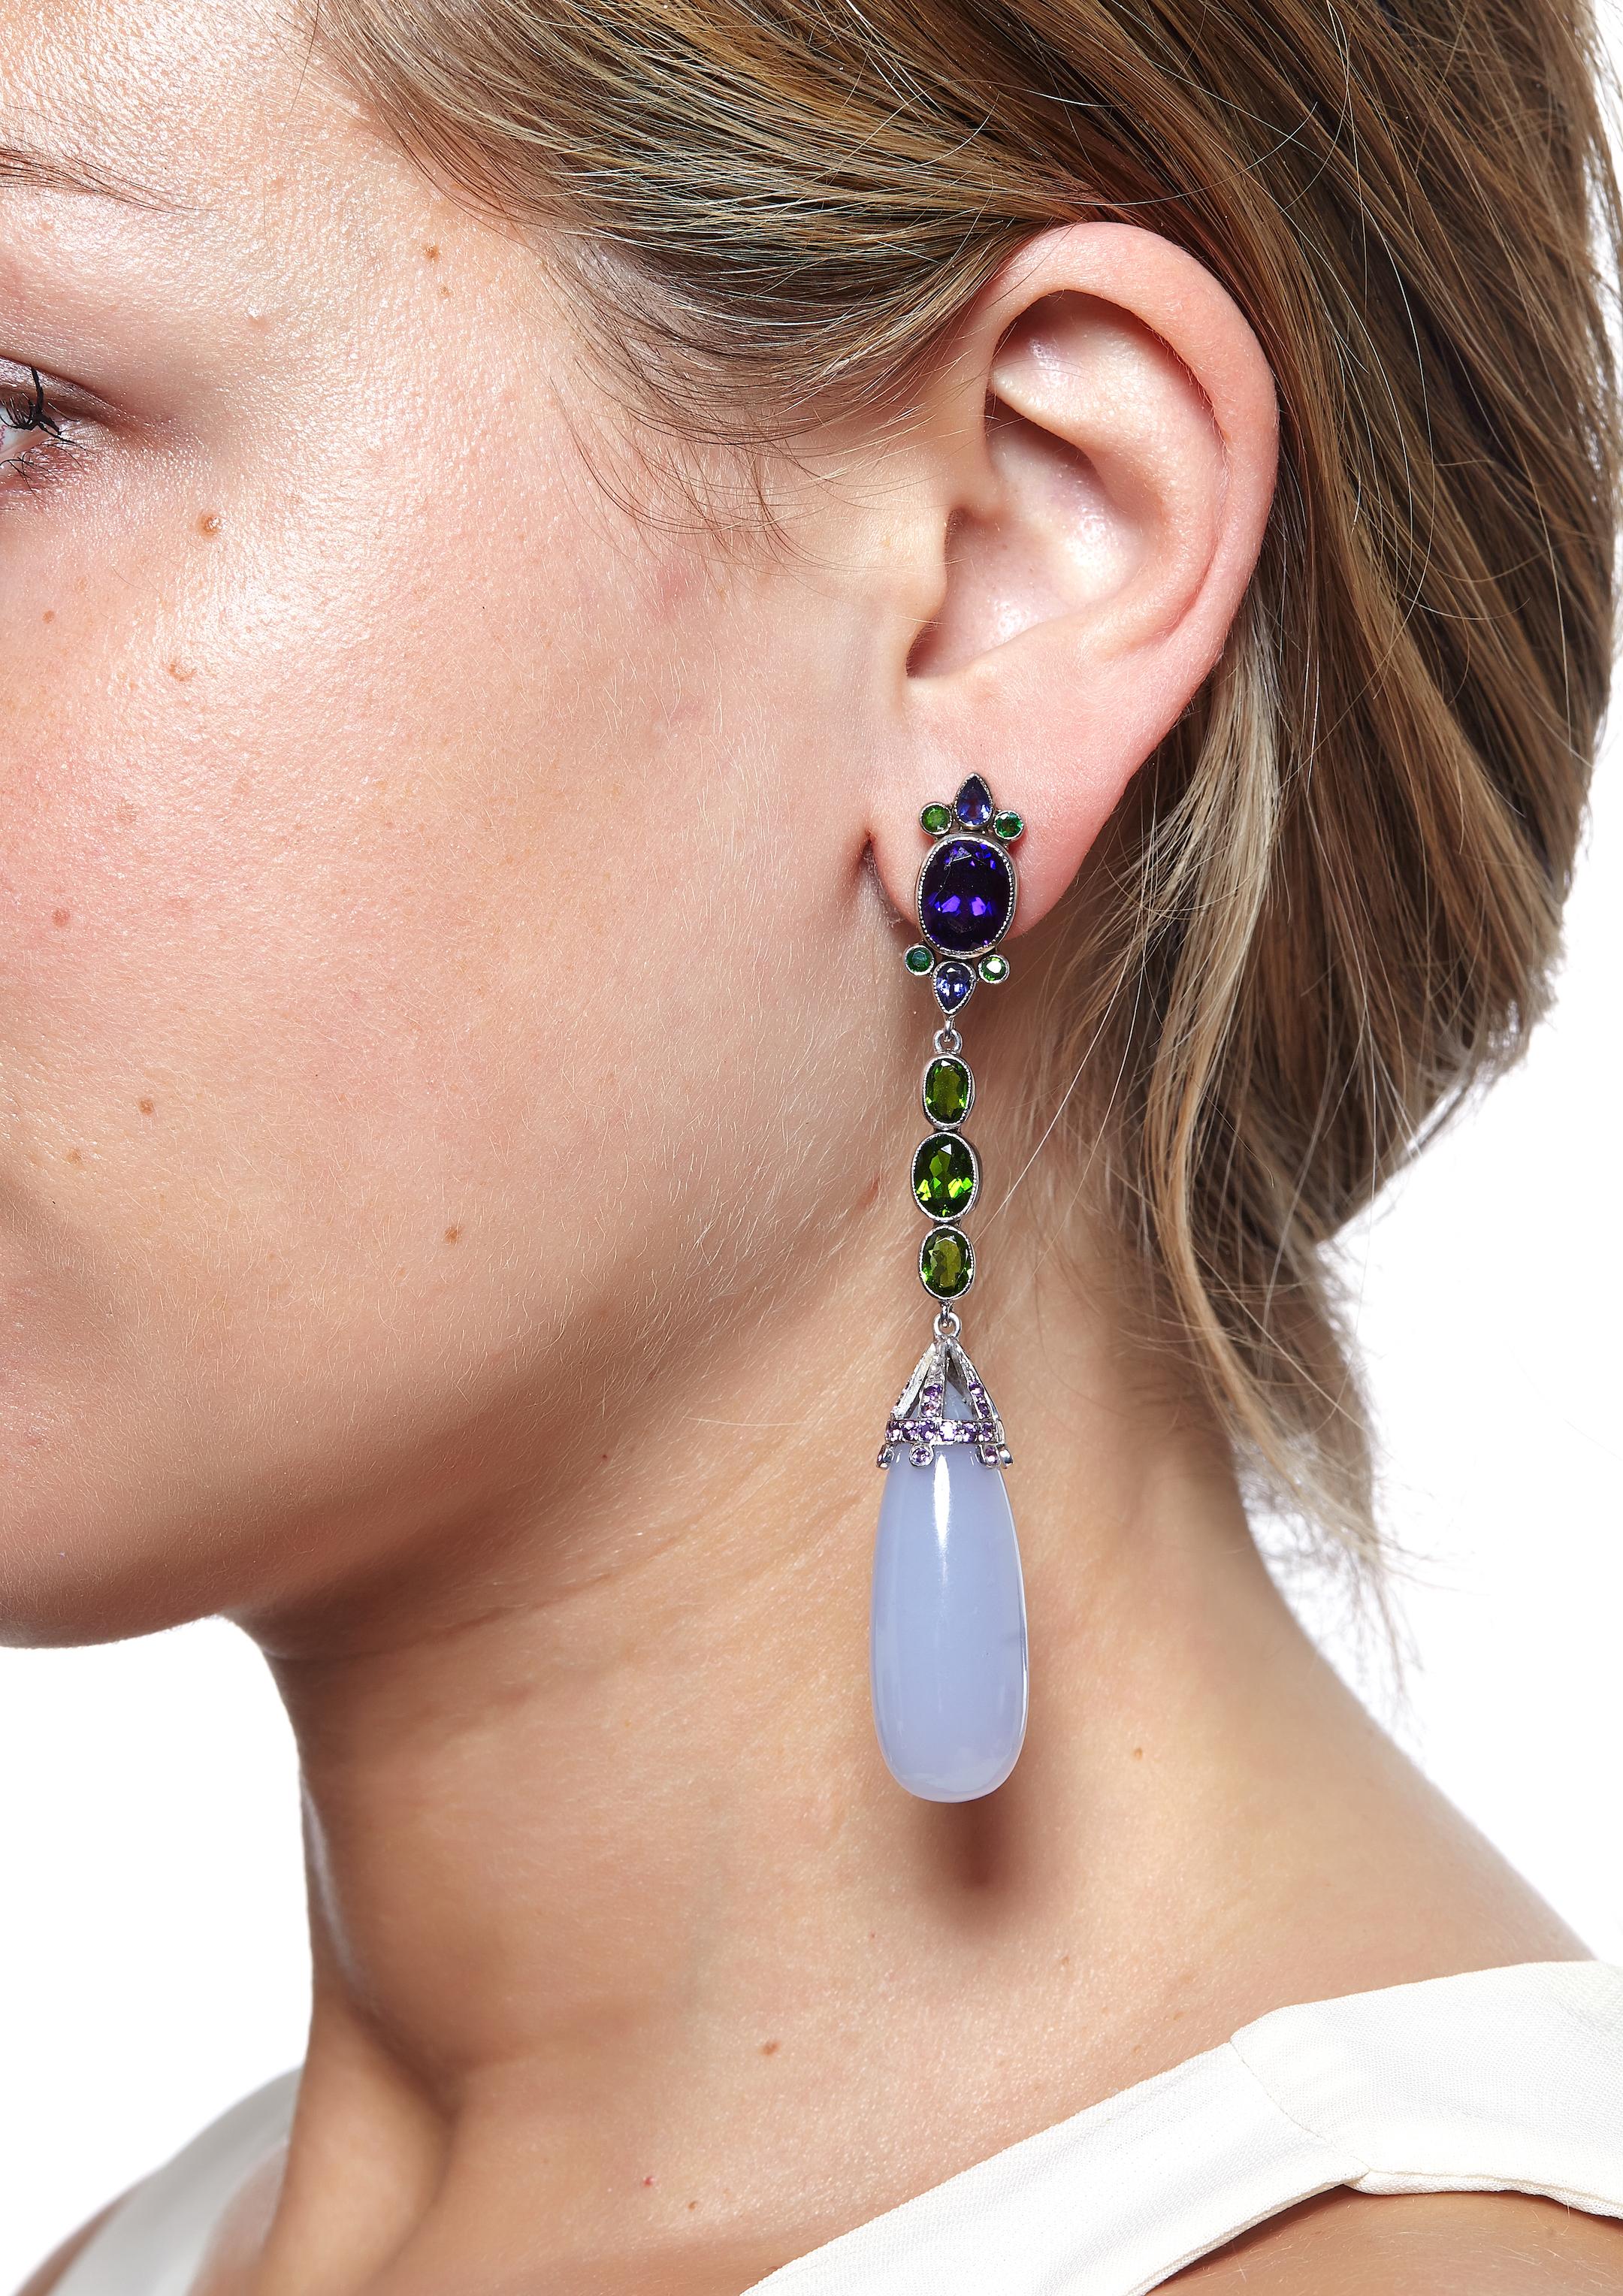 Sabrina Balsky Jewelry
Dangle Natural Blue Chalcedony Earrings Drops from Turkey,  Deep Zambian Amethyst ovals, surrounded by Russian Demantoid, and pear shaped Iolite,  with Chrome Diopside joining to the signature bead cap with Brazilian Amethyst